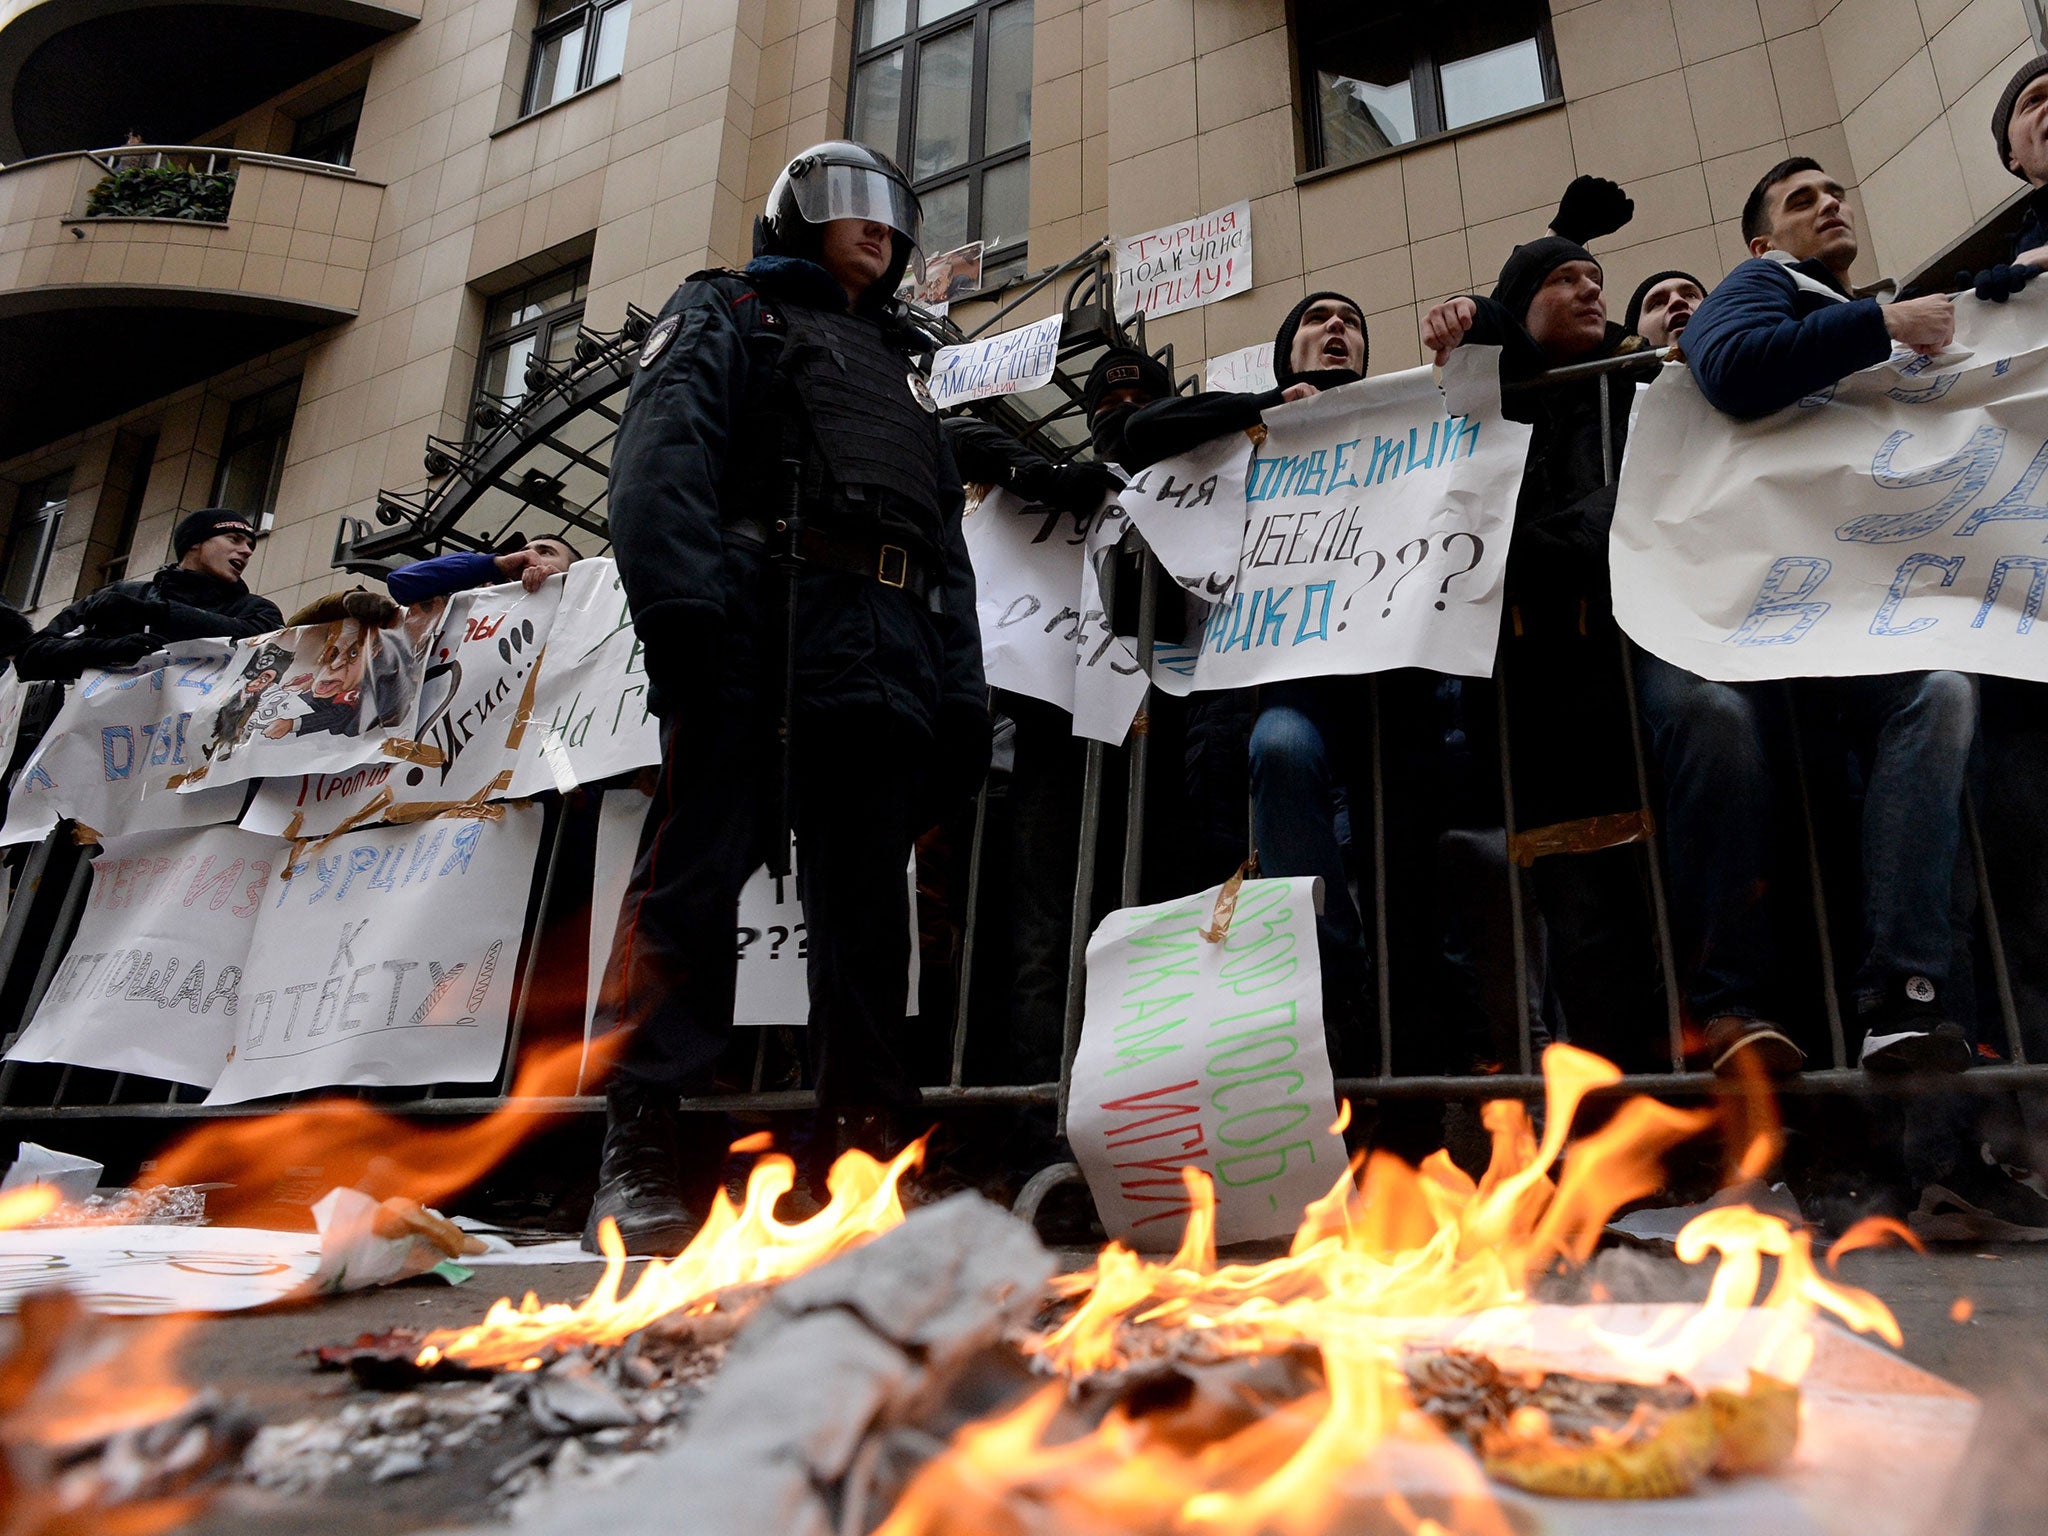 Protesters hold placards and shout slogans as they take part in an anti-Turkey picket outside the Turkish embassy in Moscow on November 25, 2015.